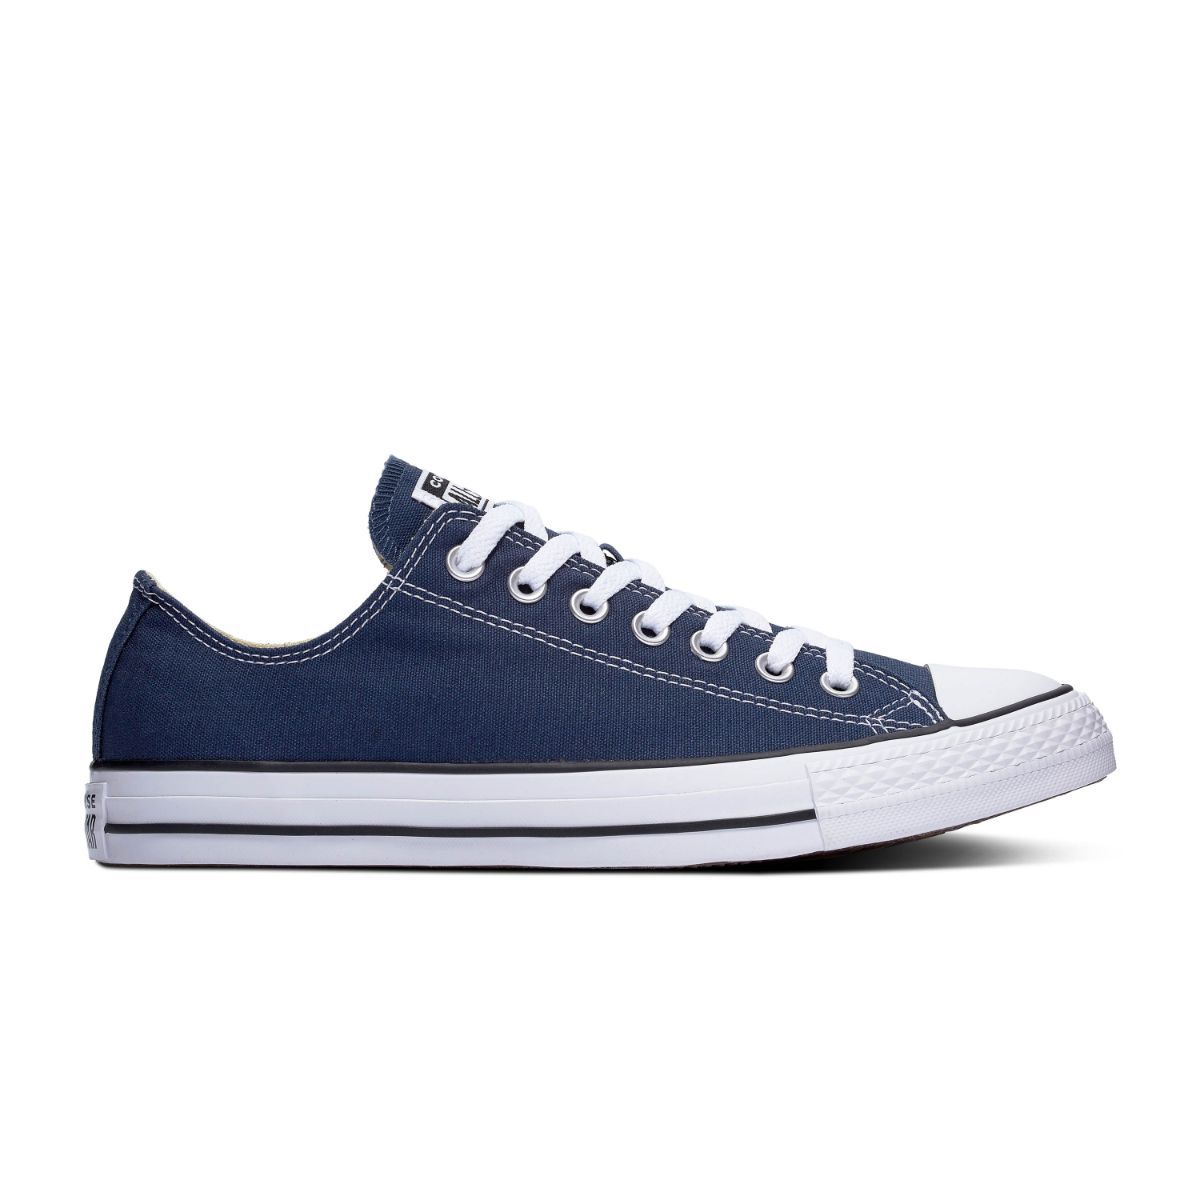 Converse Chuck Taylor All Star Navy Low Top